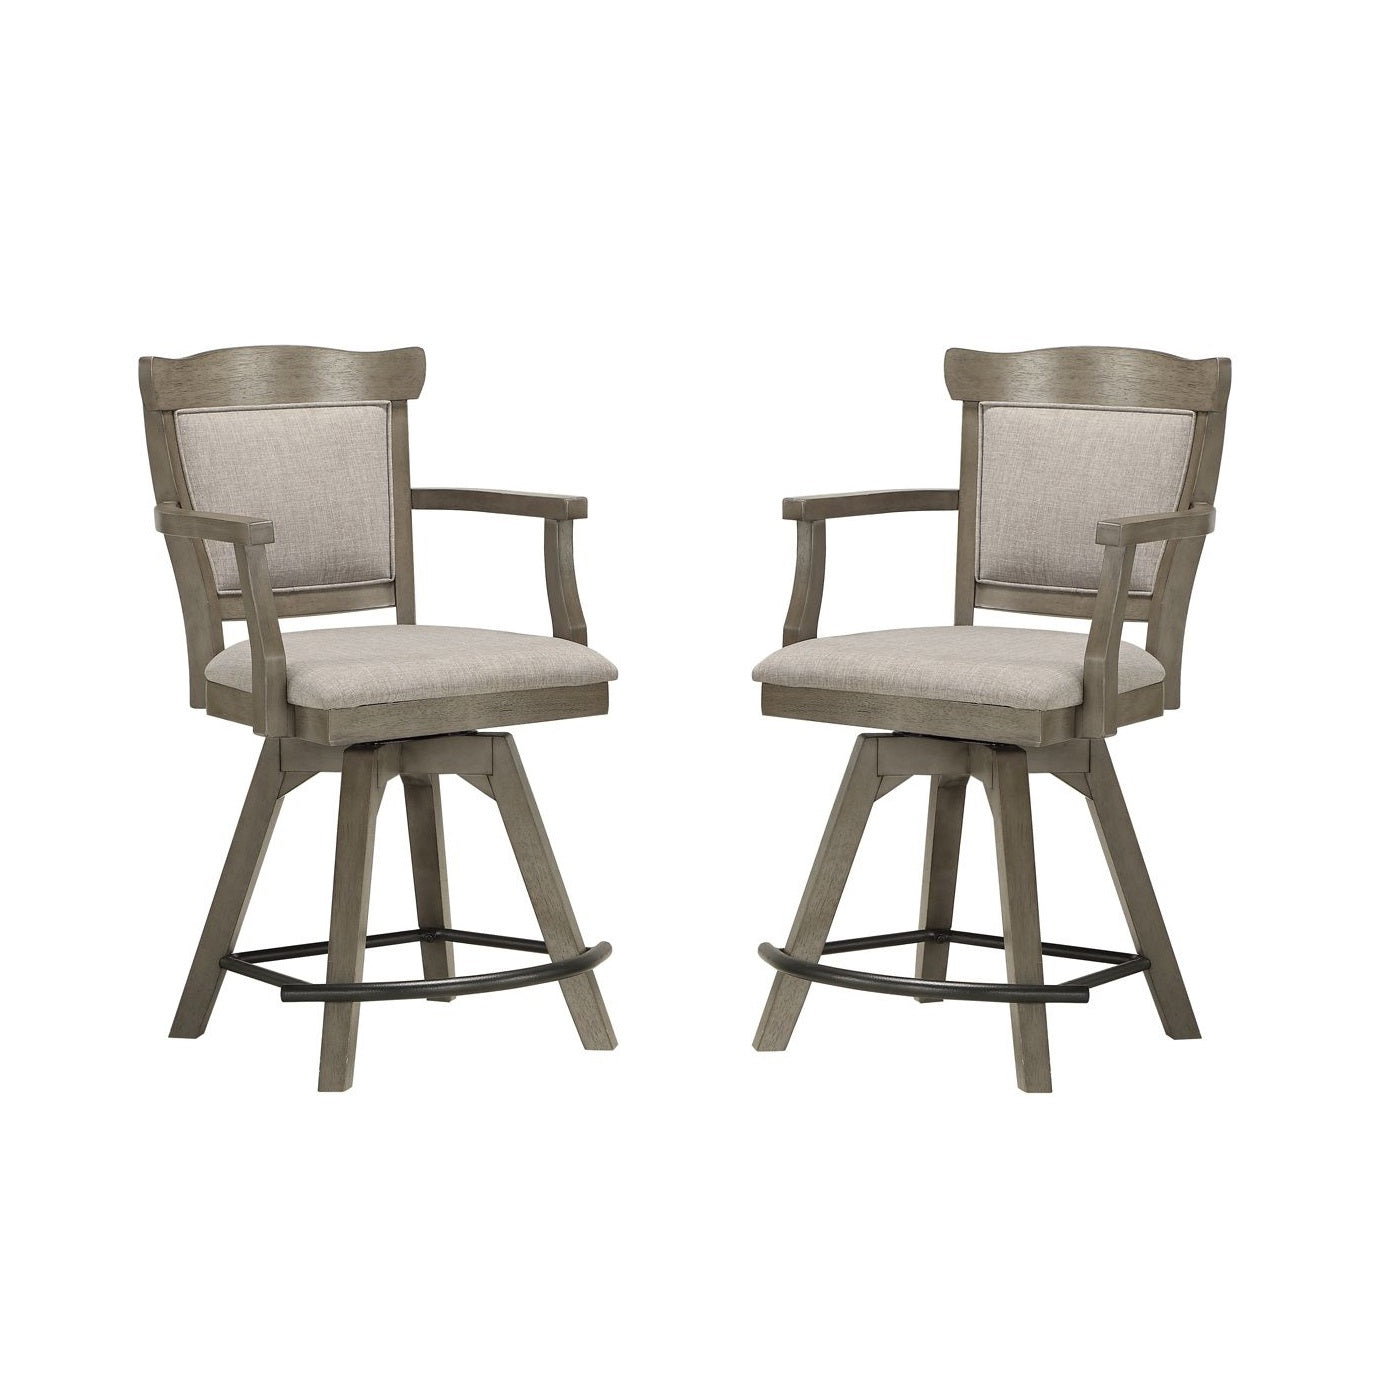 ECI Furniture Pine Crest Tulip Spectator Swivel Counter Stool With Upholstered Seat (Set of 2)